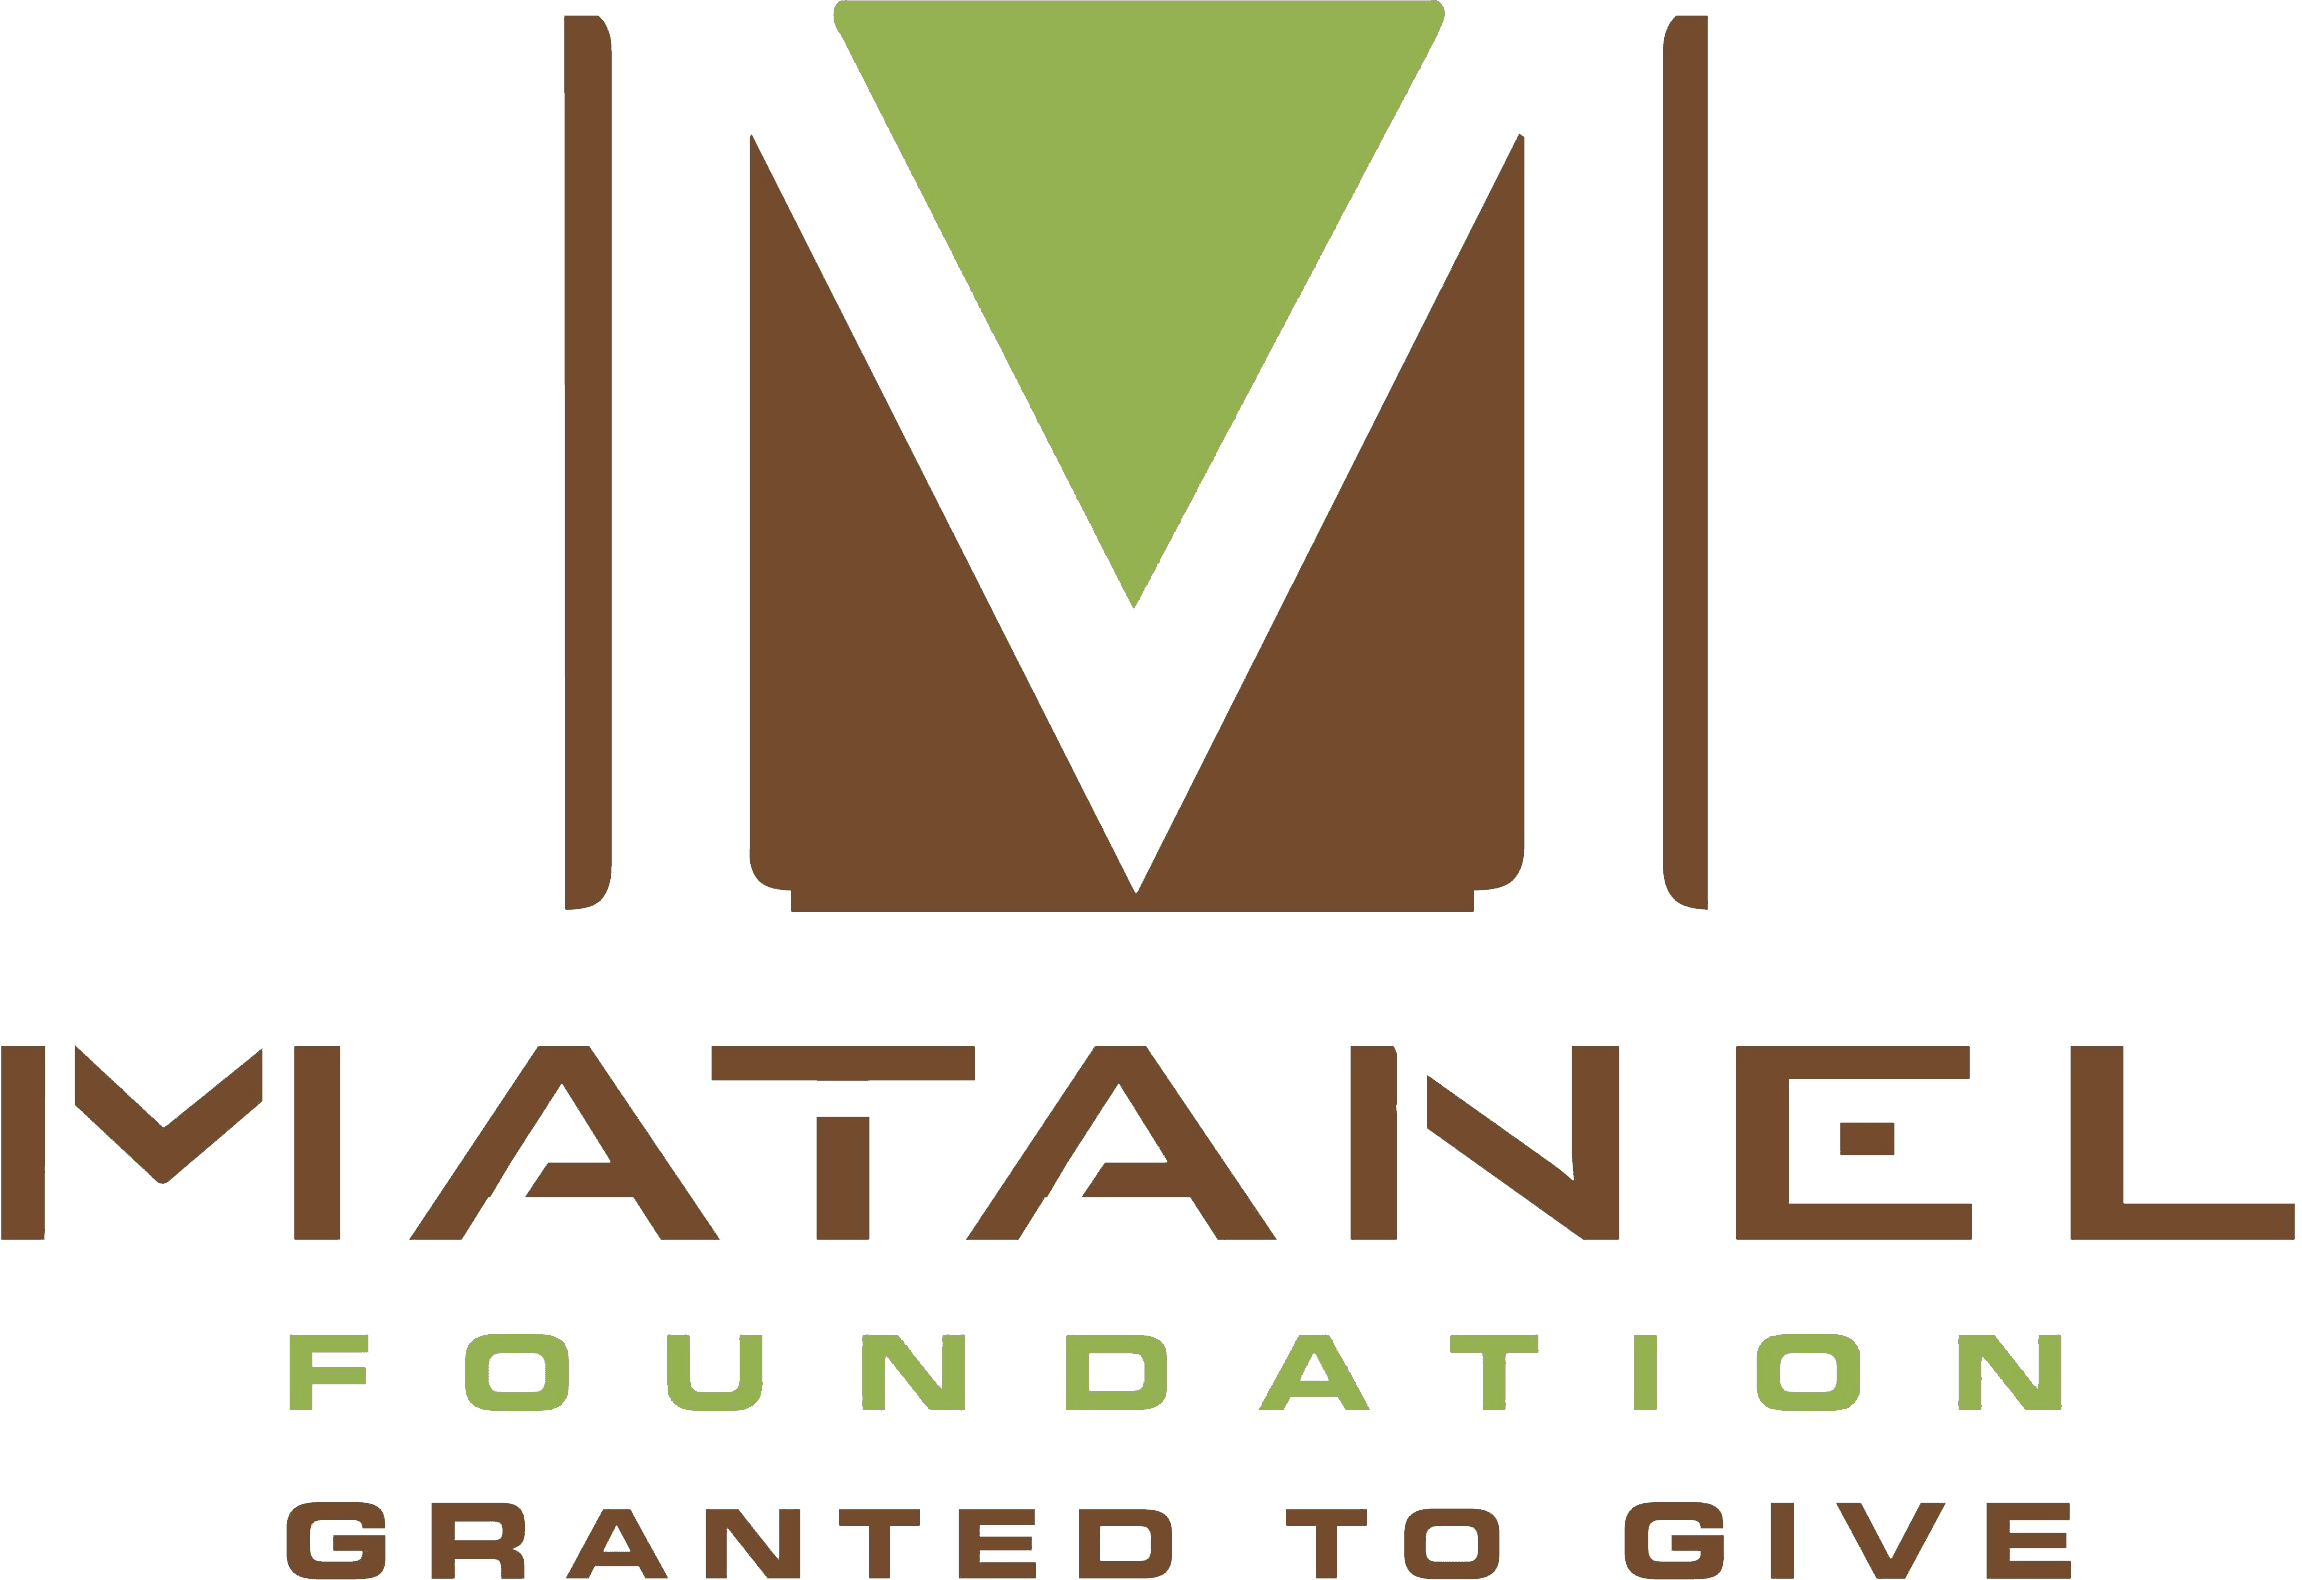 With the encouragement & support of the Matanel Foundation